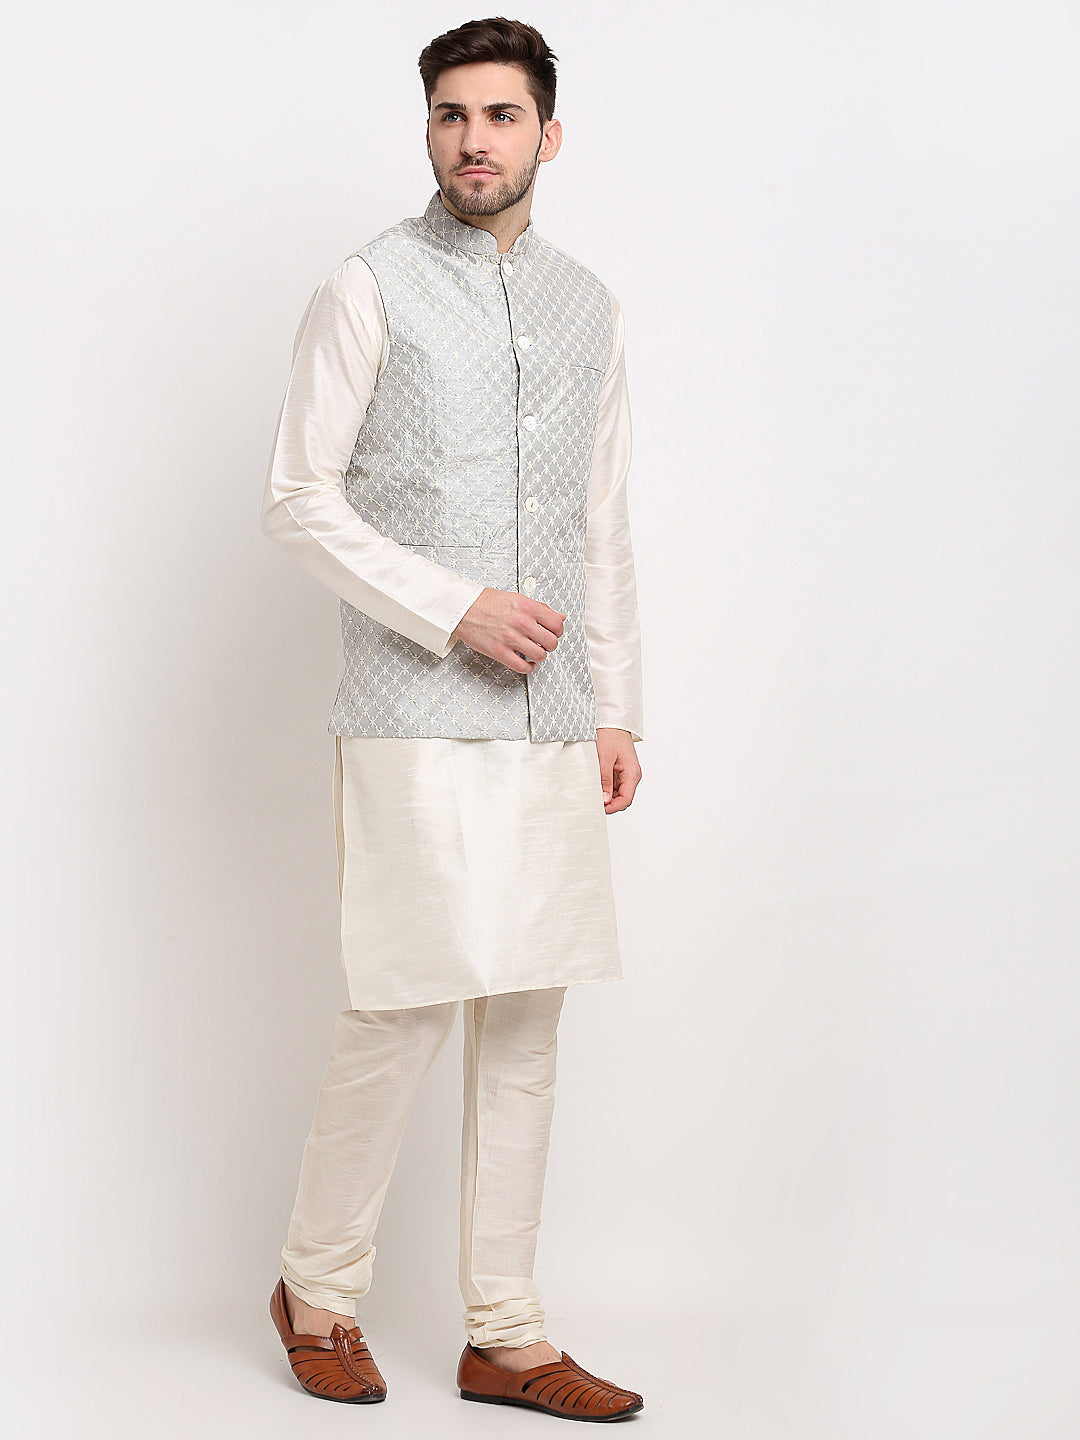 Jompers Men's Grey Grey and White Embroidered Nehru Jacket